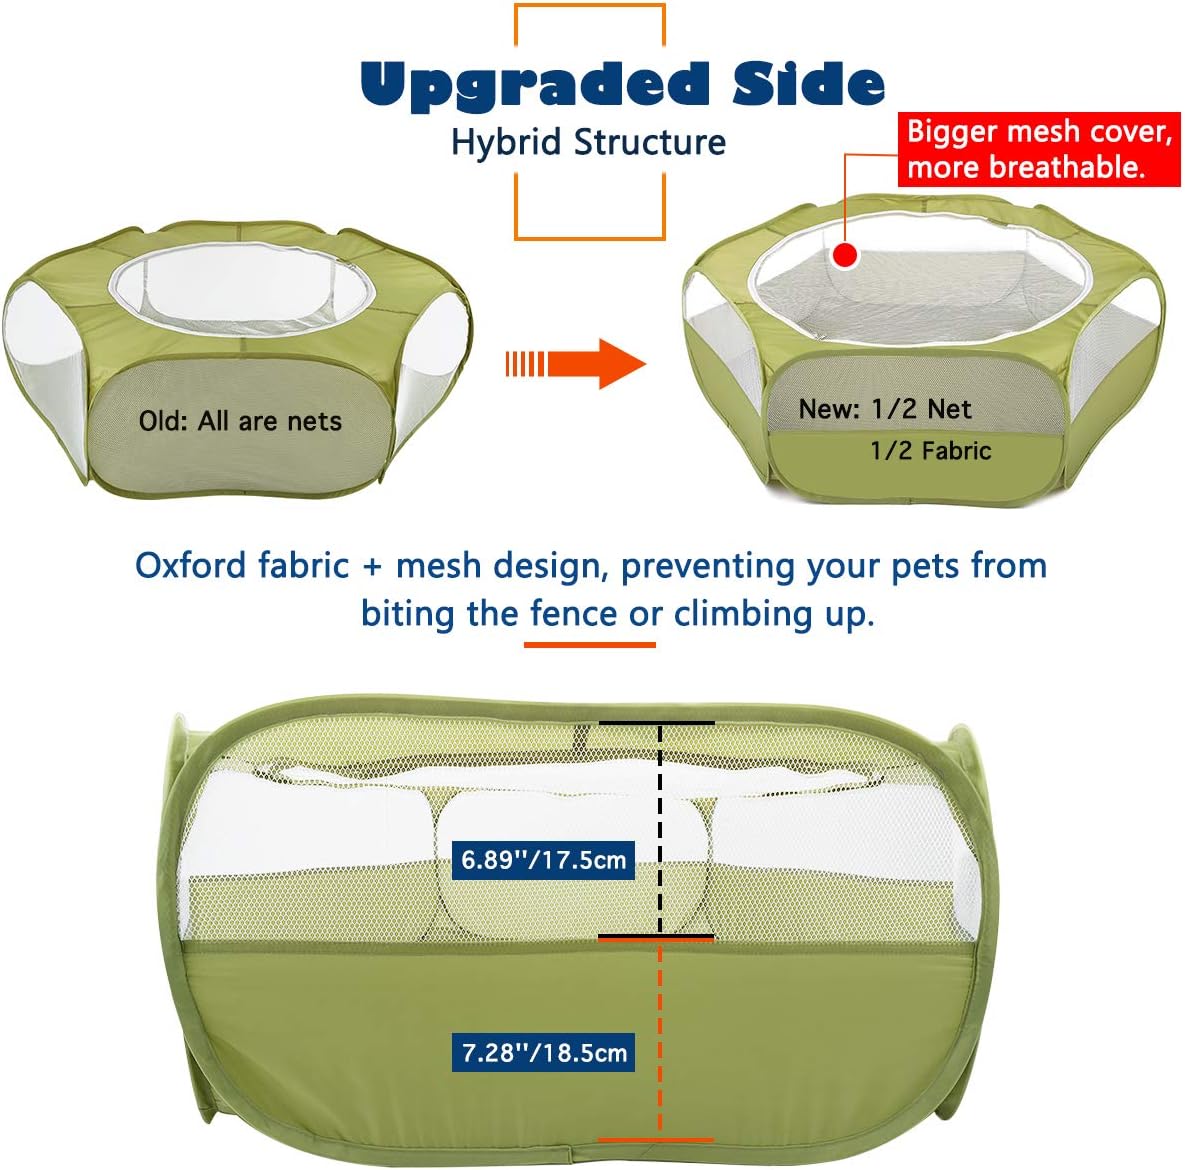 Portable Playpen Breathable Indoor Pet Cage Tent with Zipper Cover for Small Pets, Avocado Green